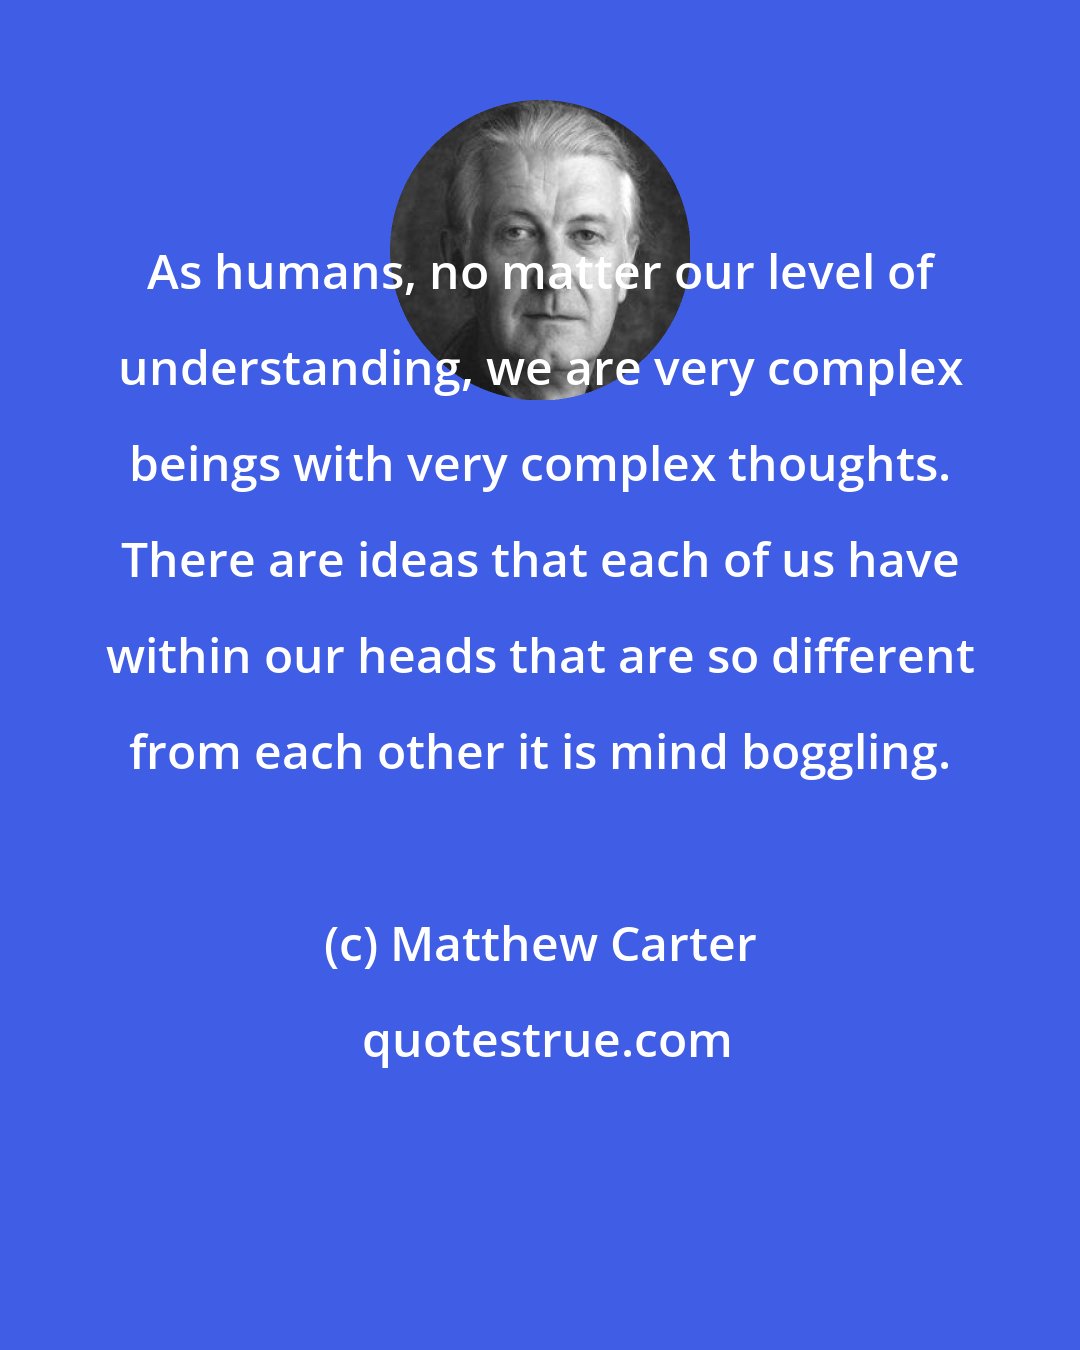 Matthew Carter: As humans, no matter our level of understanding, we are very complex beings with very complex thoughts. There are ideas that each of us have within our heads that are so different from each other it is mind boggling.